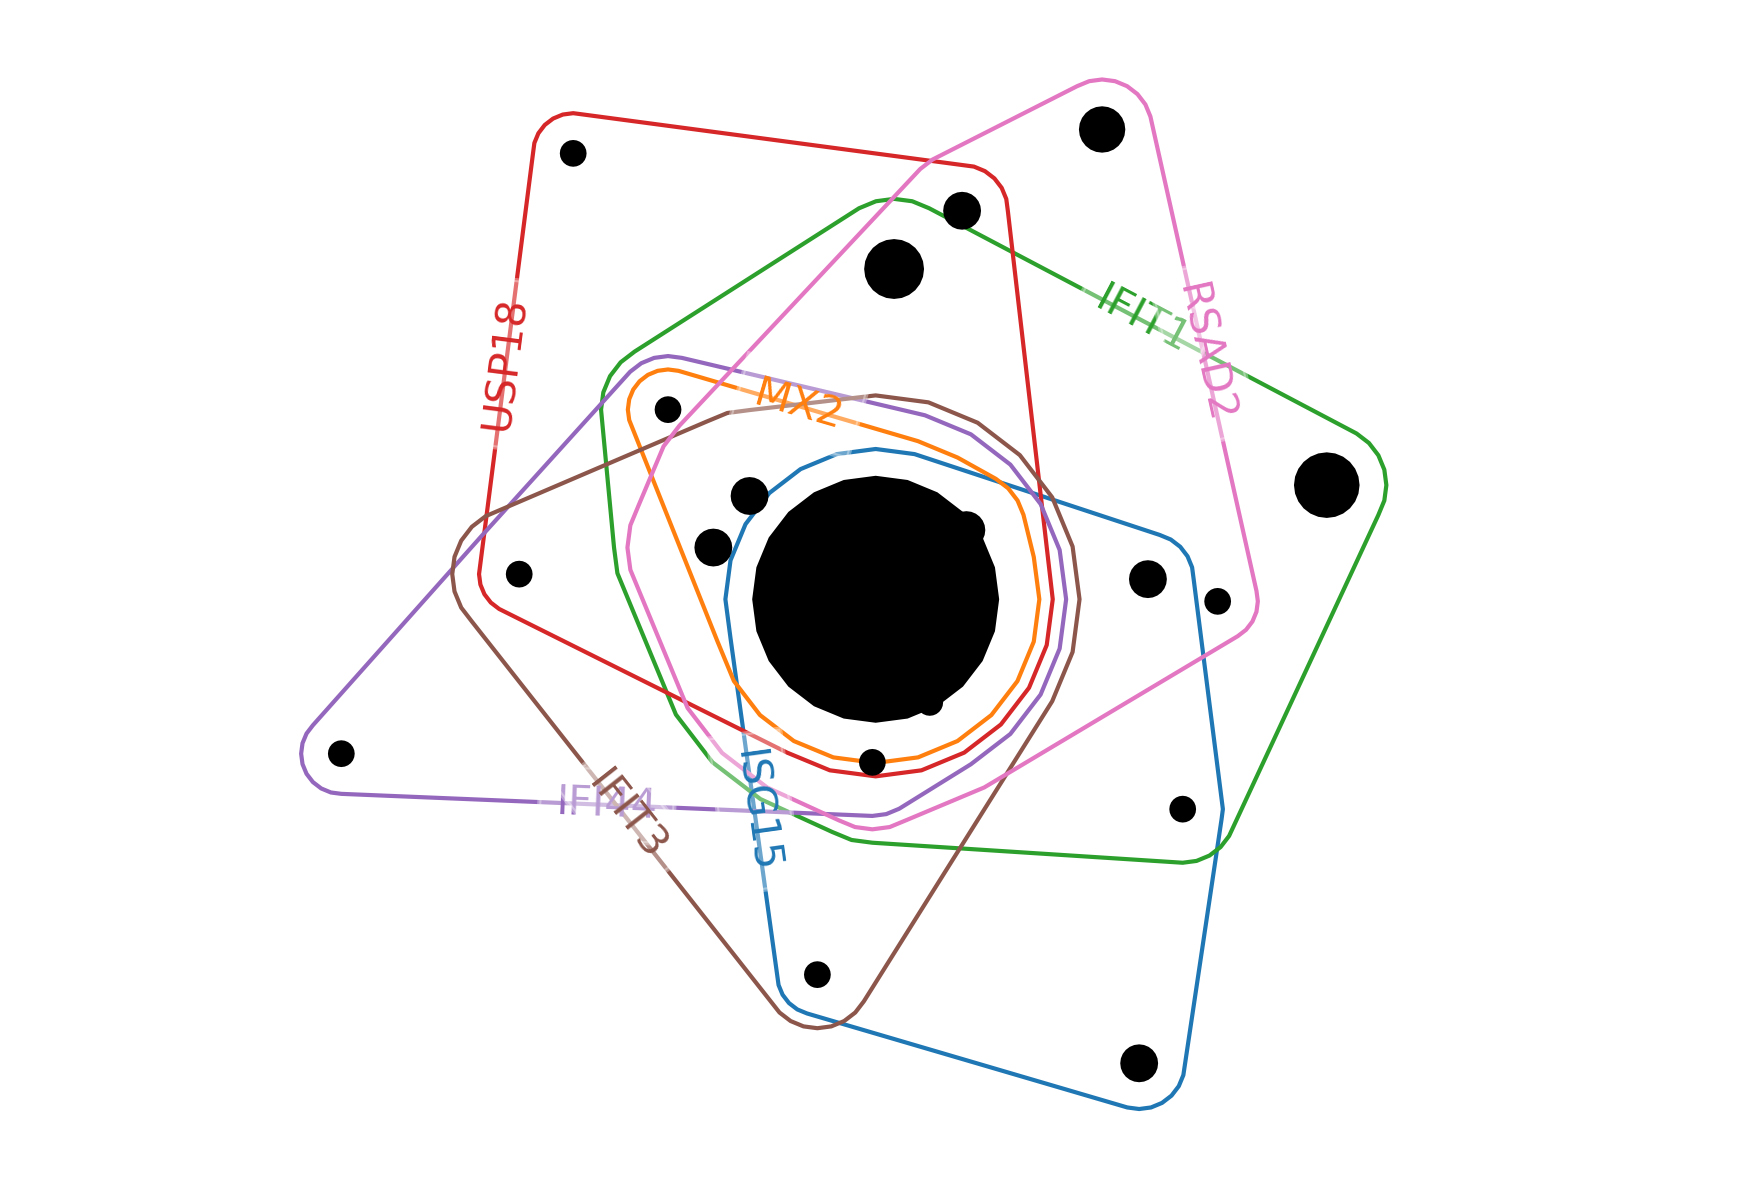 large black circle surrounded by smaller black circles and colored lines